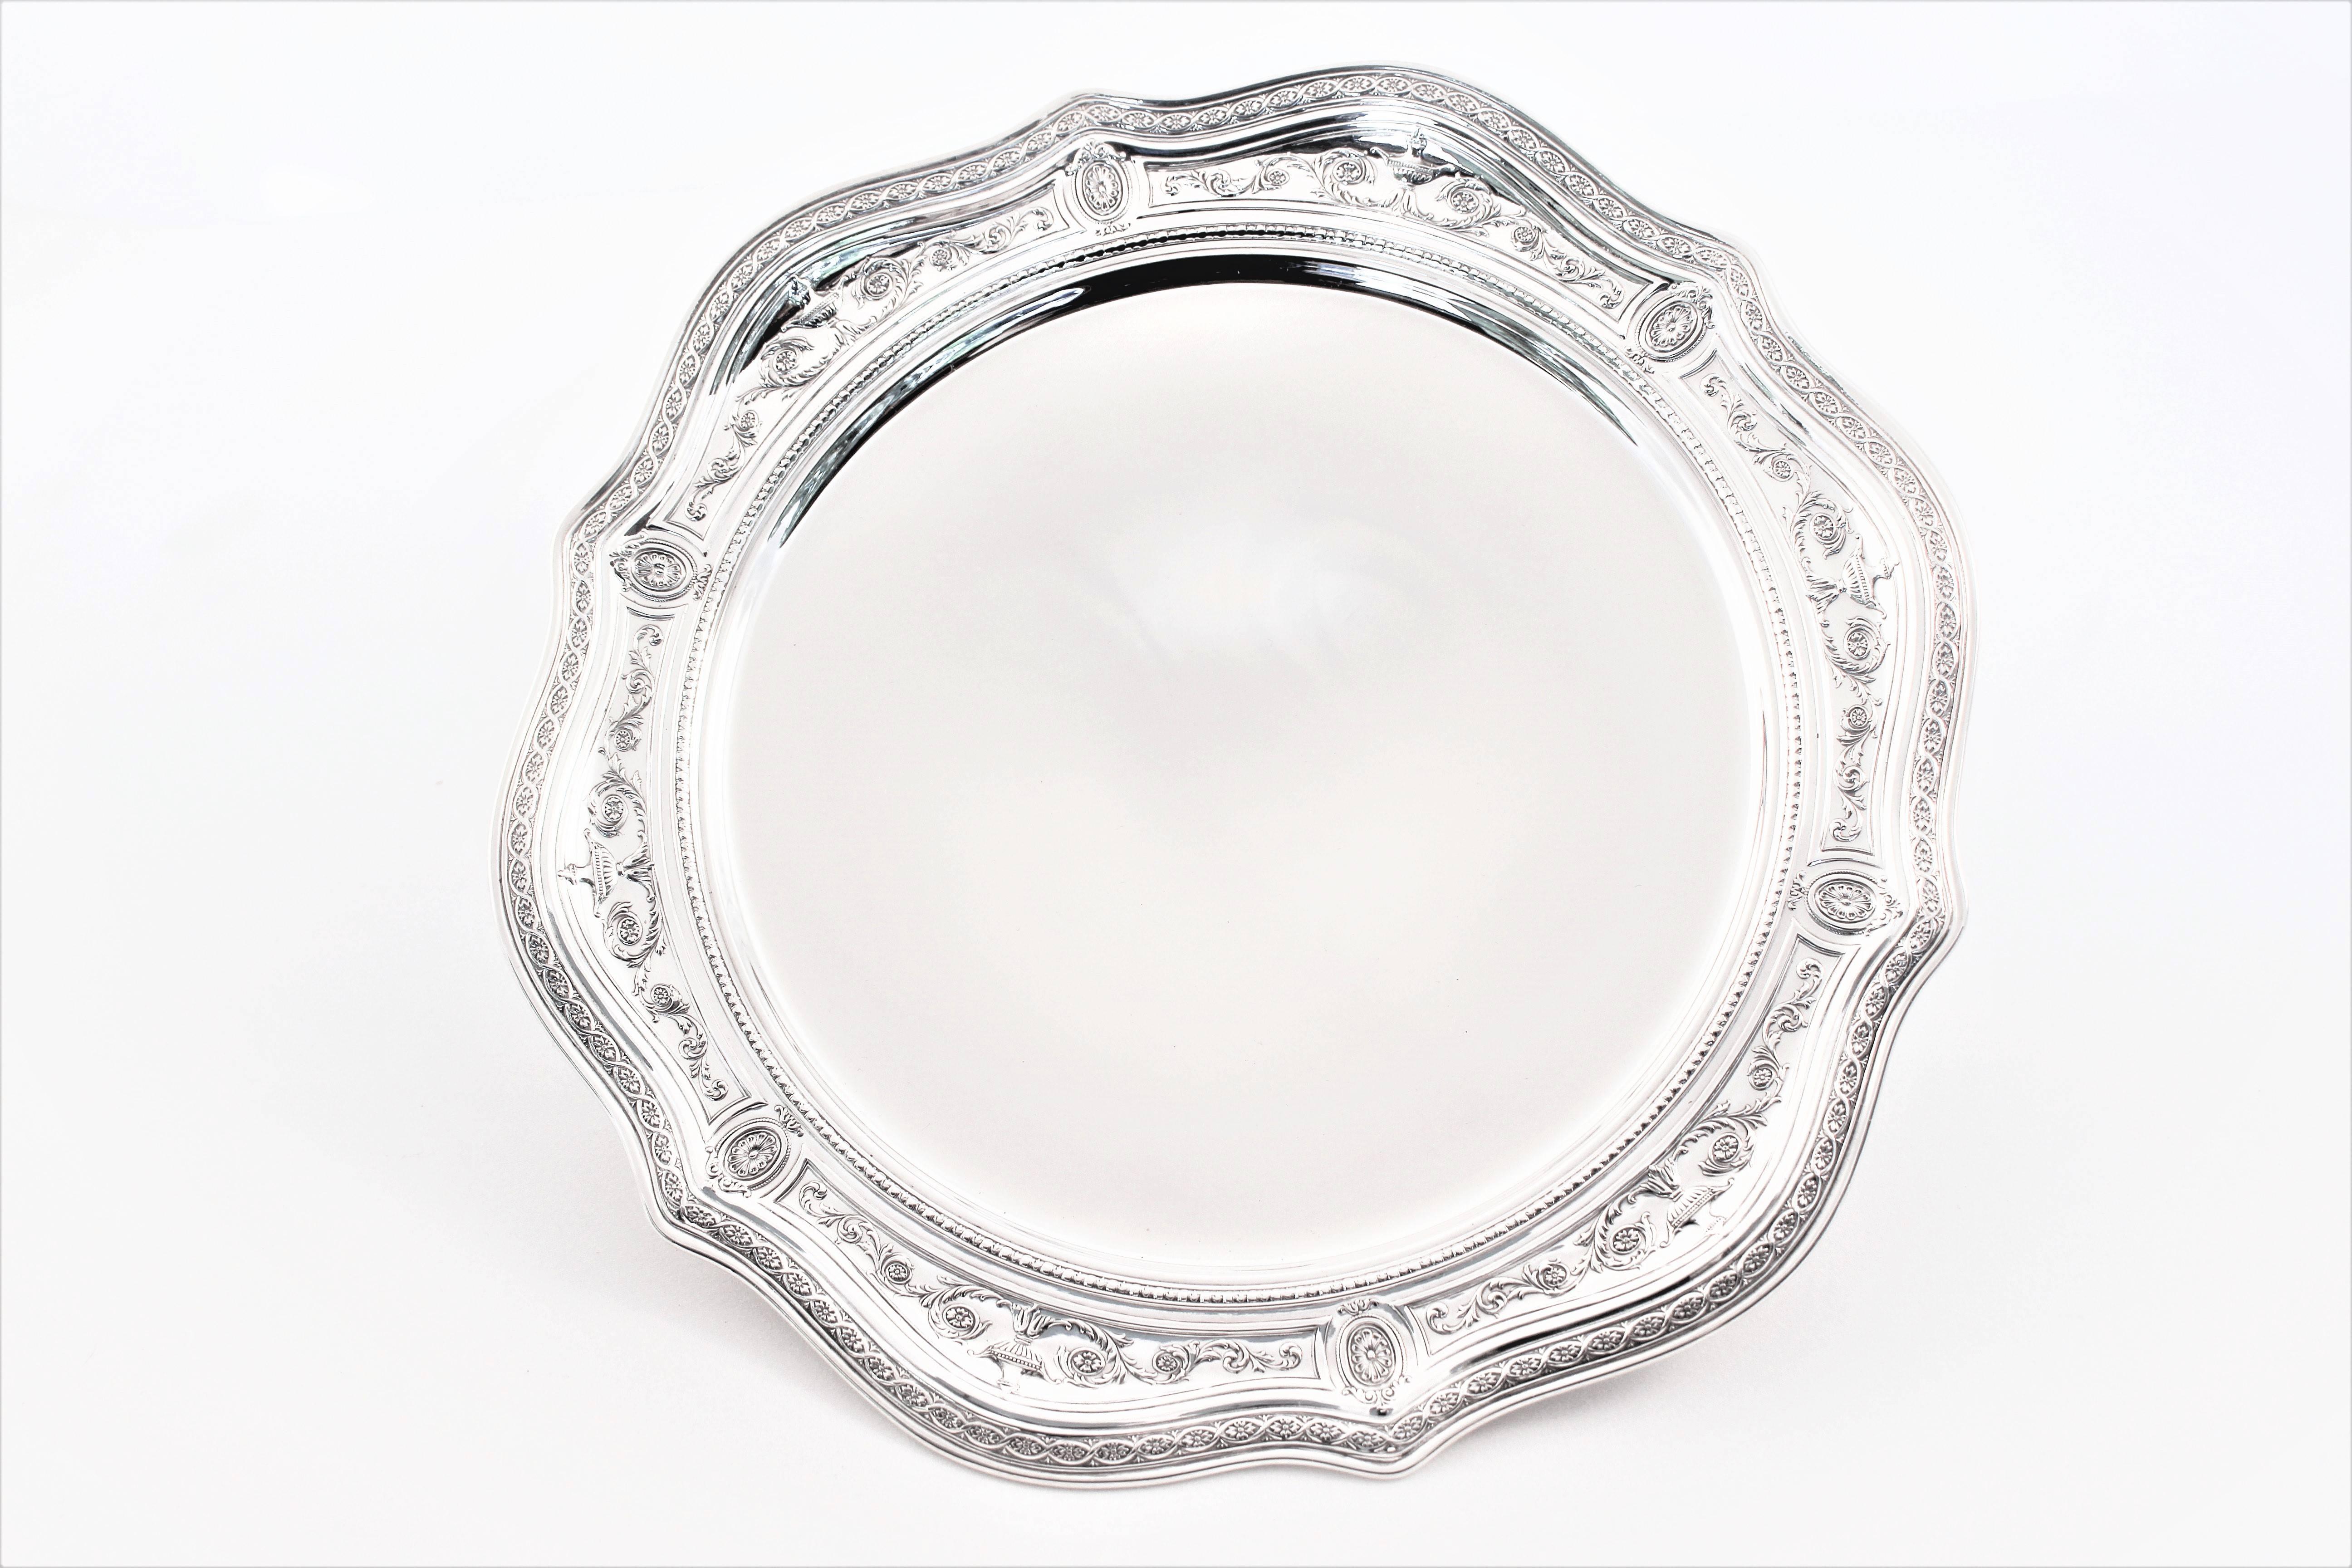 Proudly offering a pair of footed dishes by International Silver Co. A delicate design of medallions, urns and vines encircle the scalloped border. The dish sits on a pedestal thereby raising it off the surface. Although the rim has a design, it is